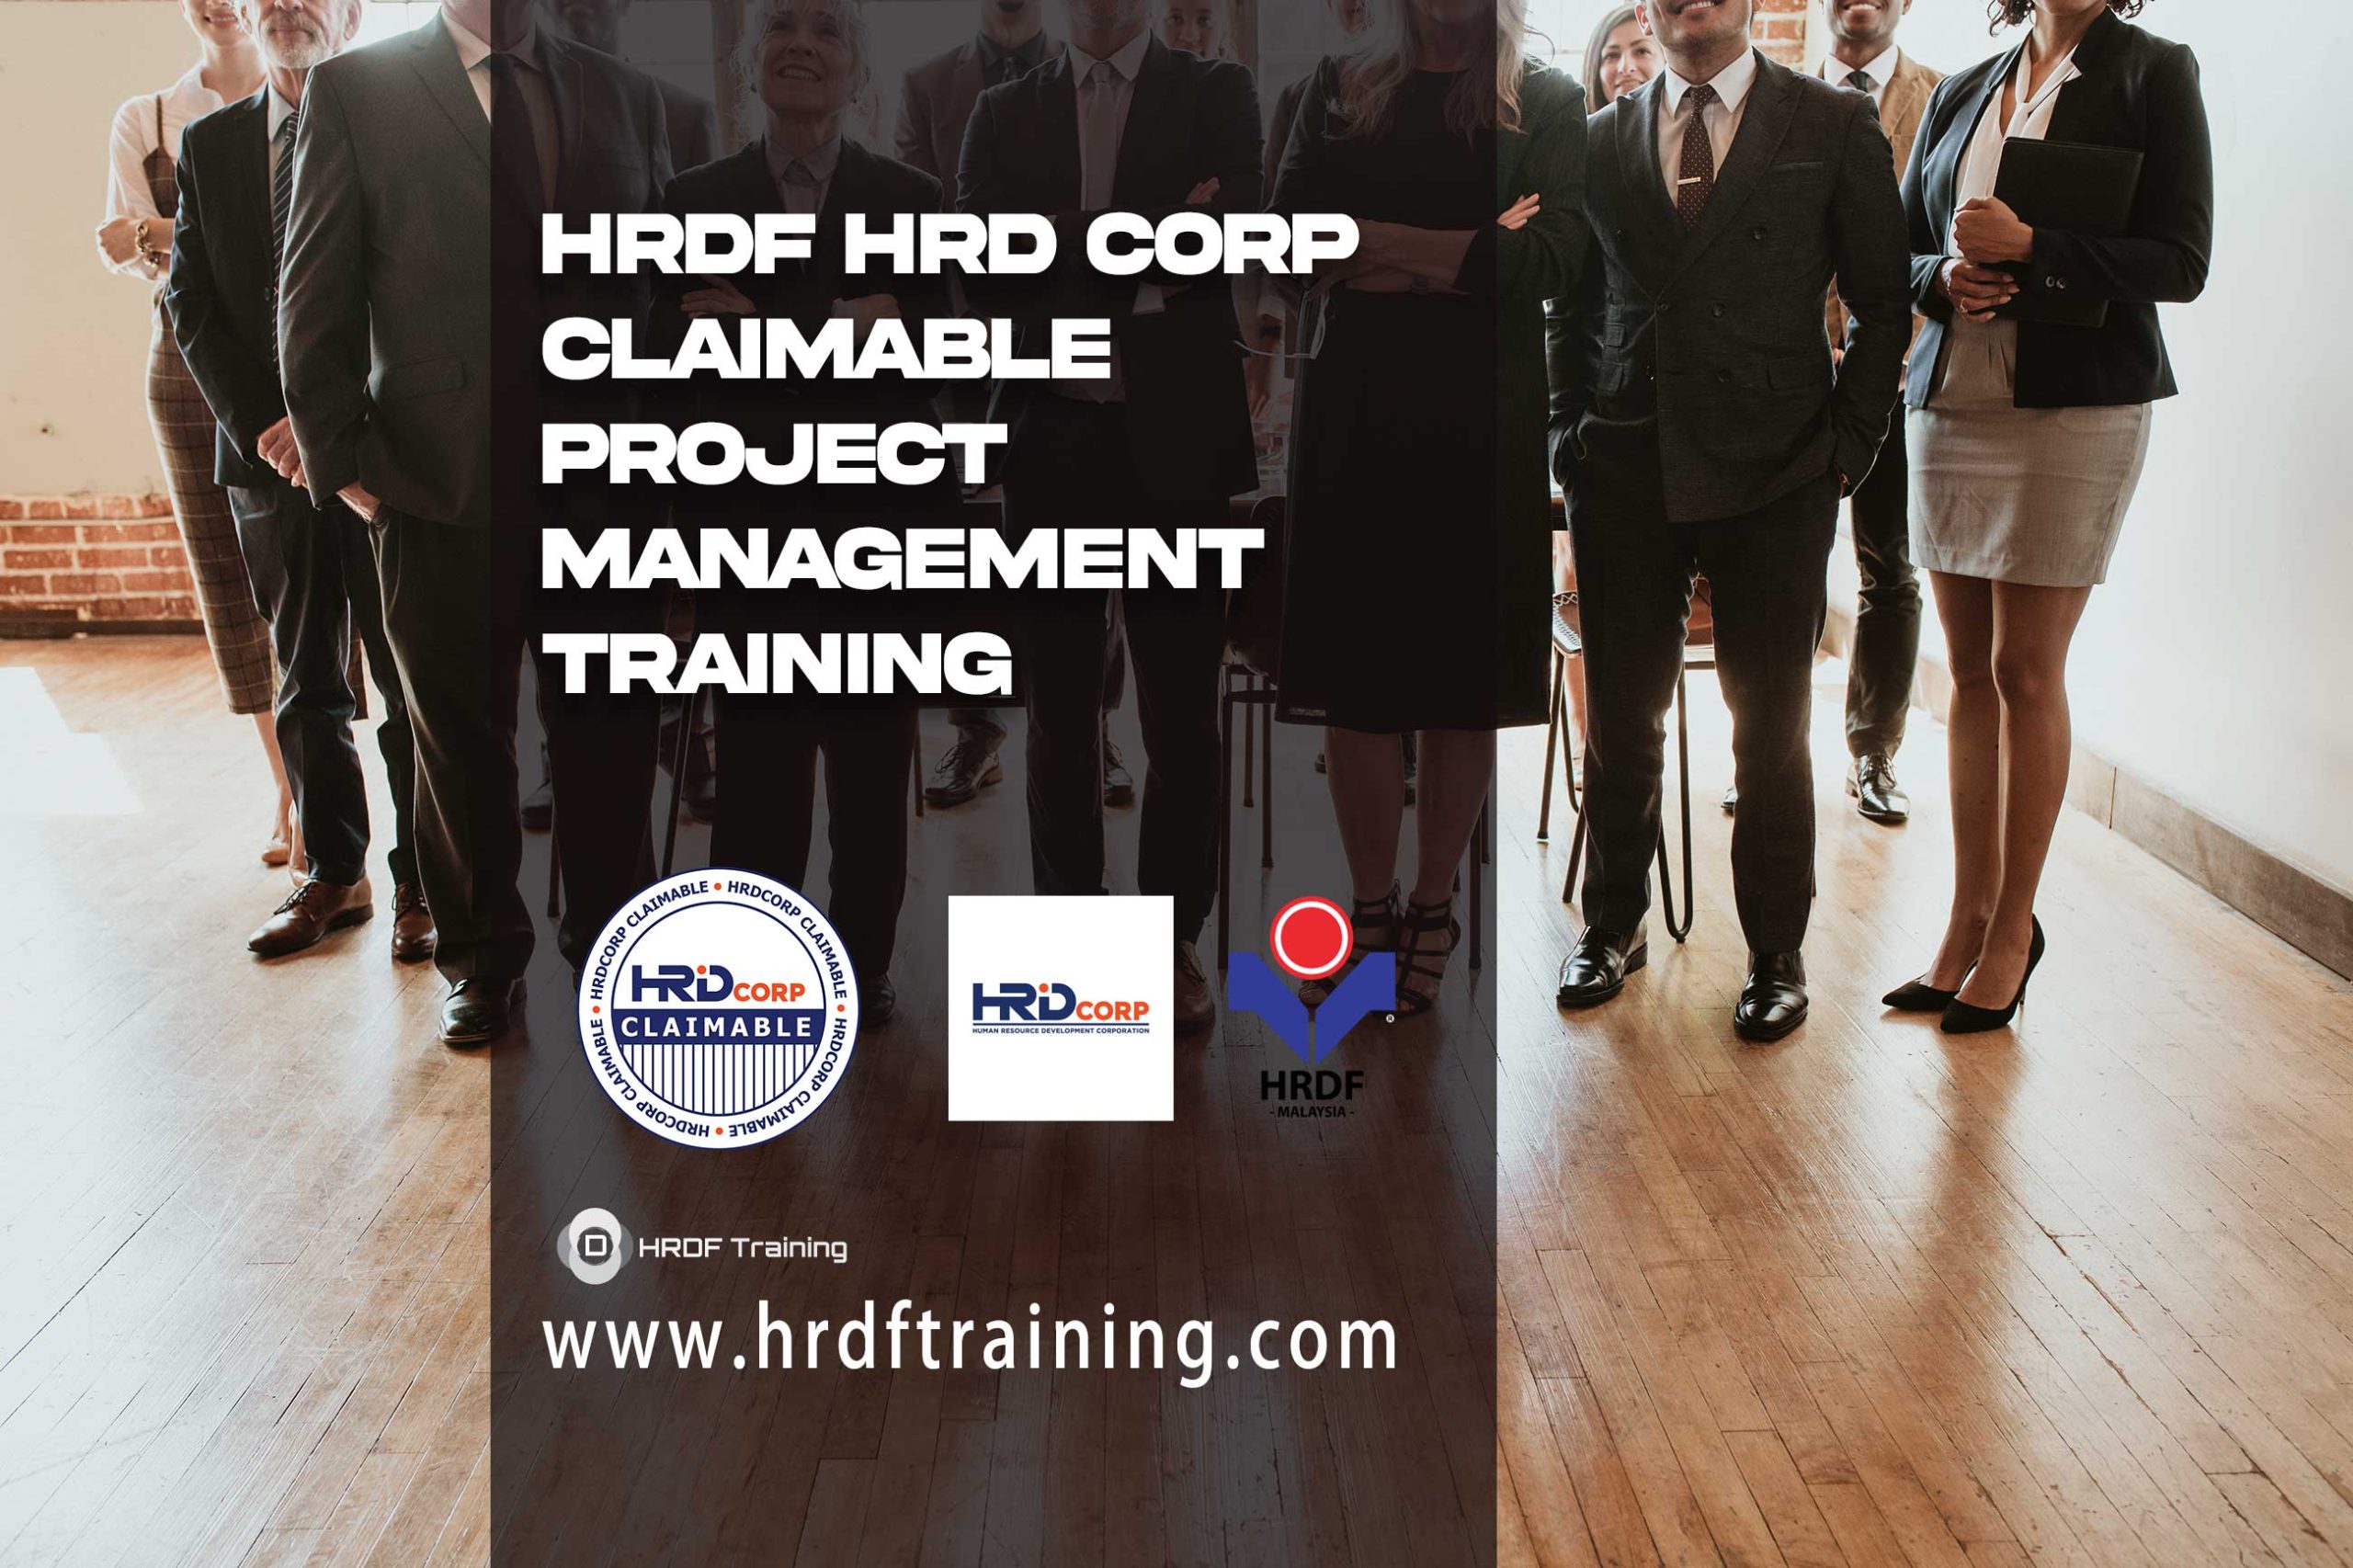 HRDF-HRD-Corp-Claimable-Project-Management-Training